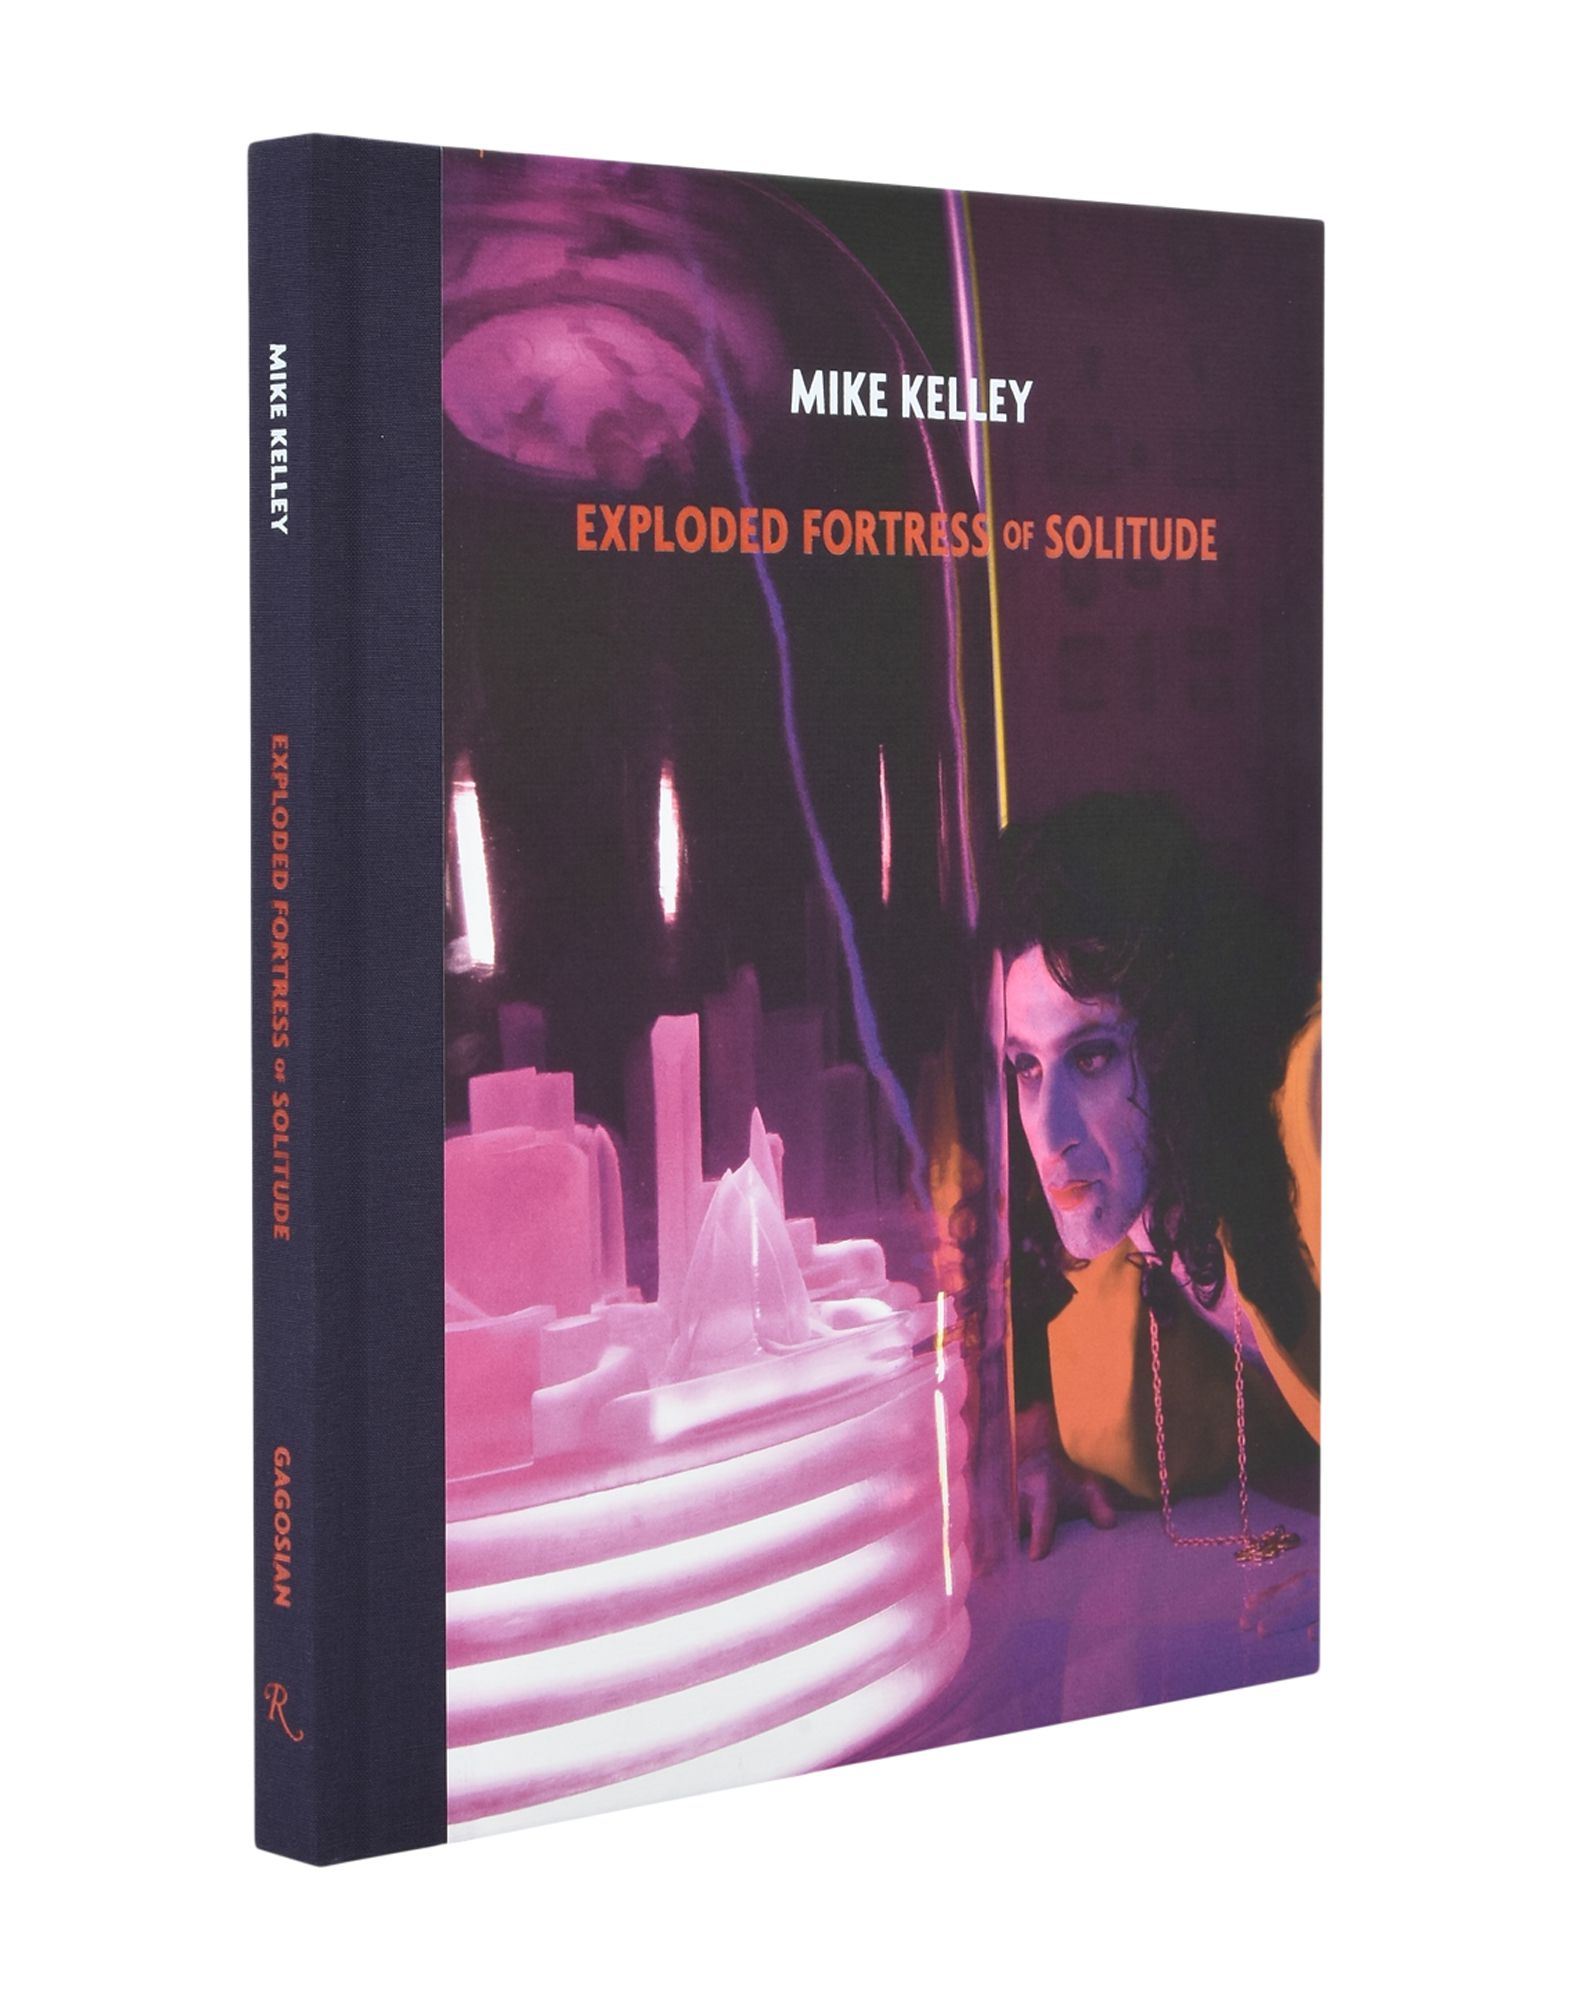 RIZZOLI INTERNATIONAL Unisex アート書籍 Mike Kelley, Exploded Fortress of Solitude (-)